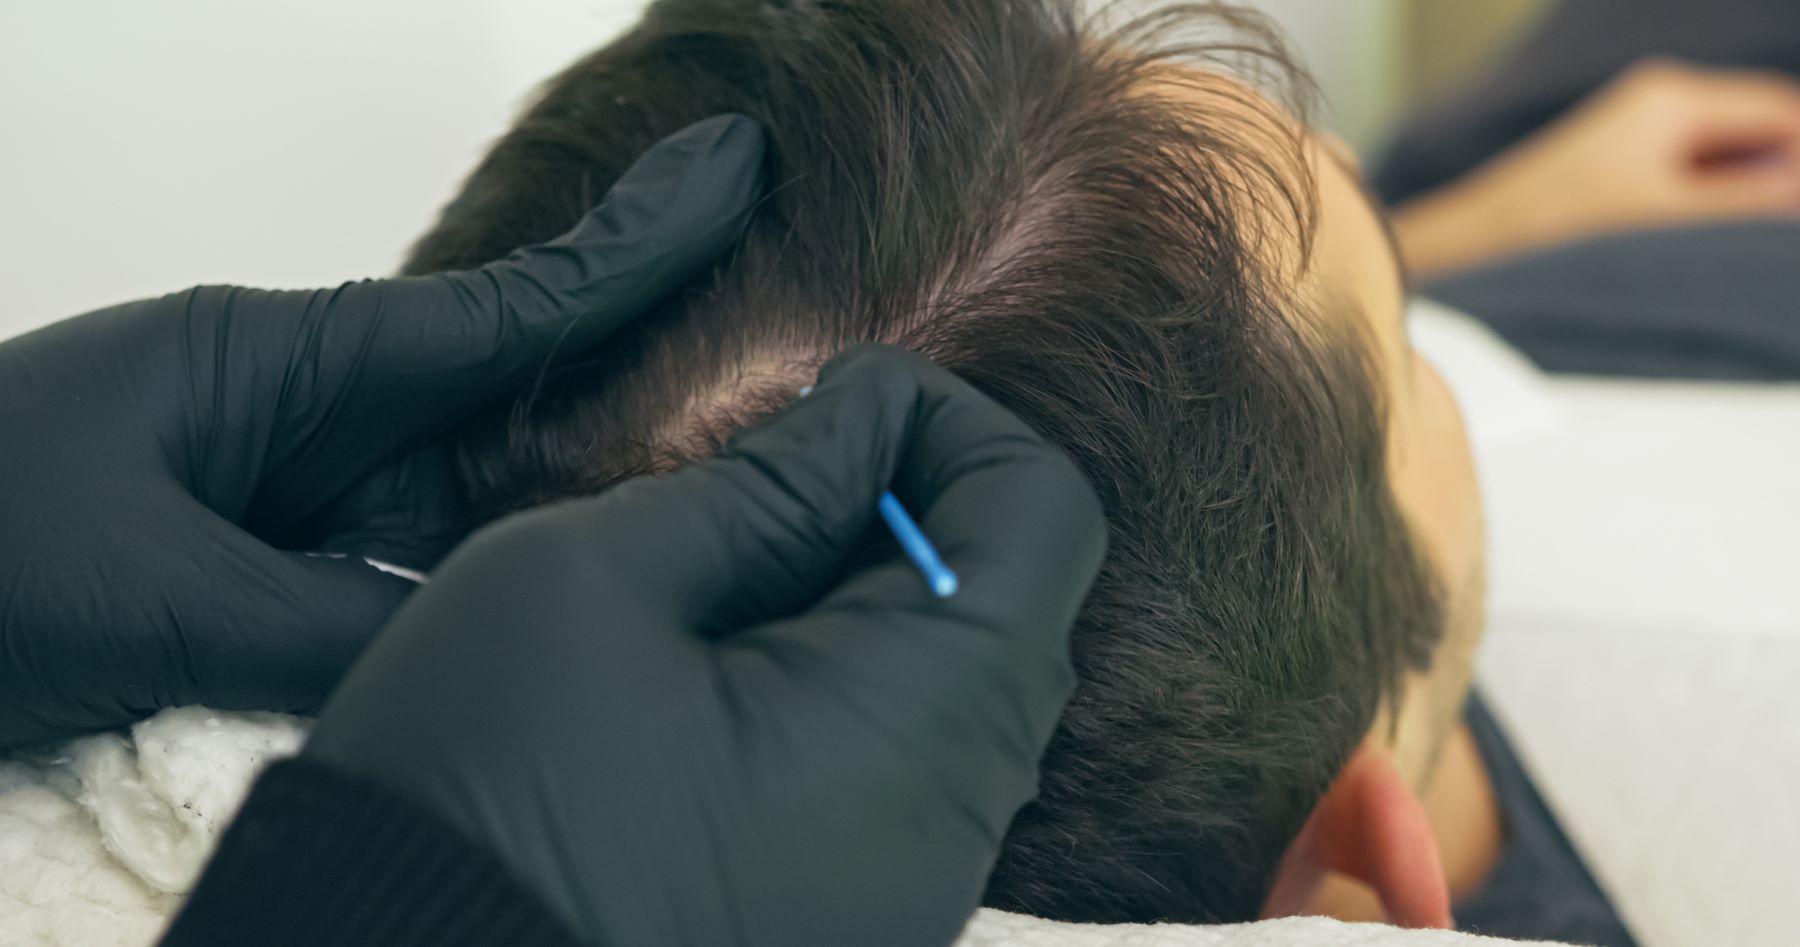 Scalp micropigmentation combined with hair transplant